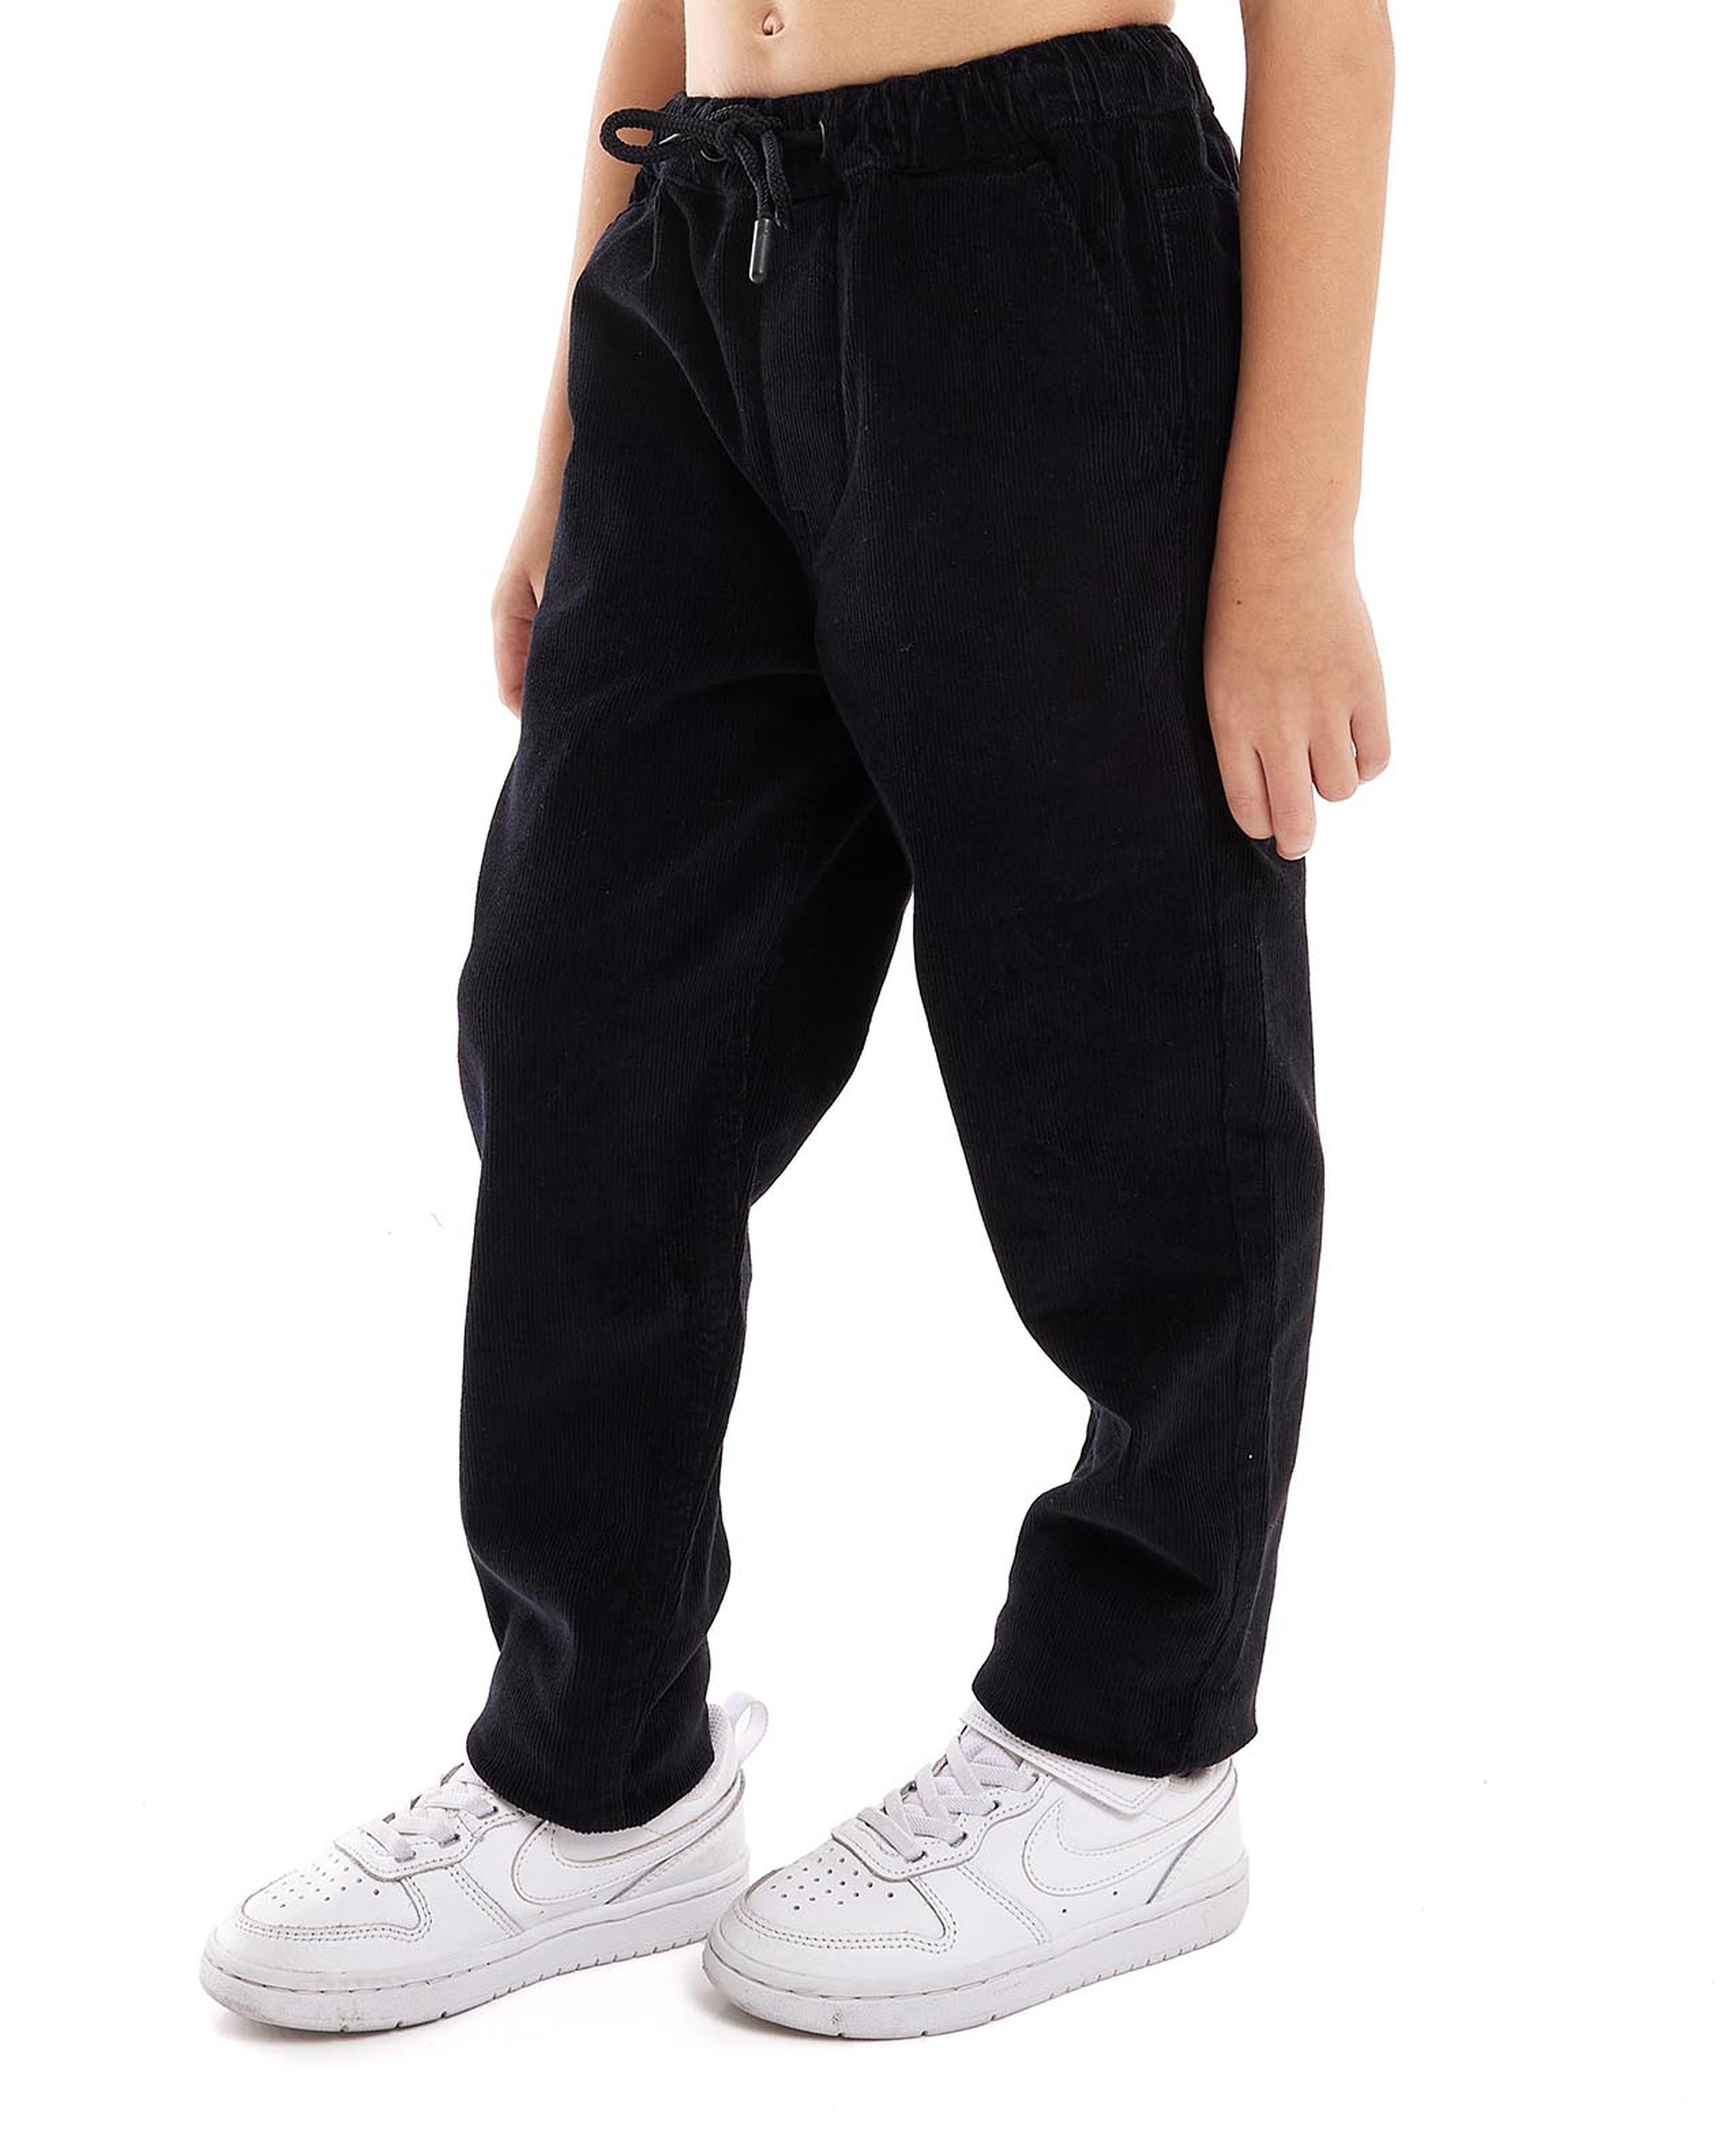 Solid Relaxed fit Trousers with Drawstring Waist